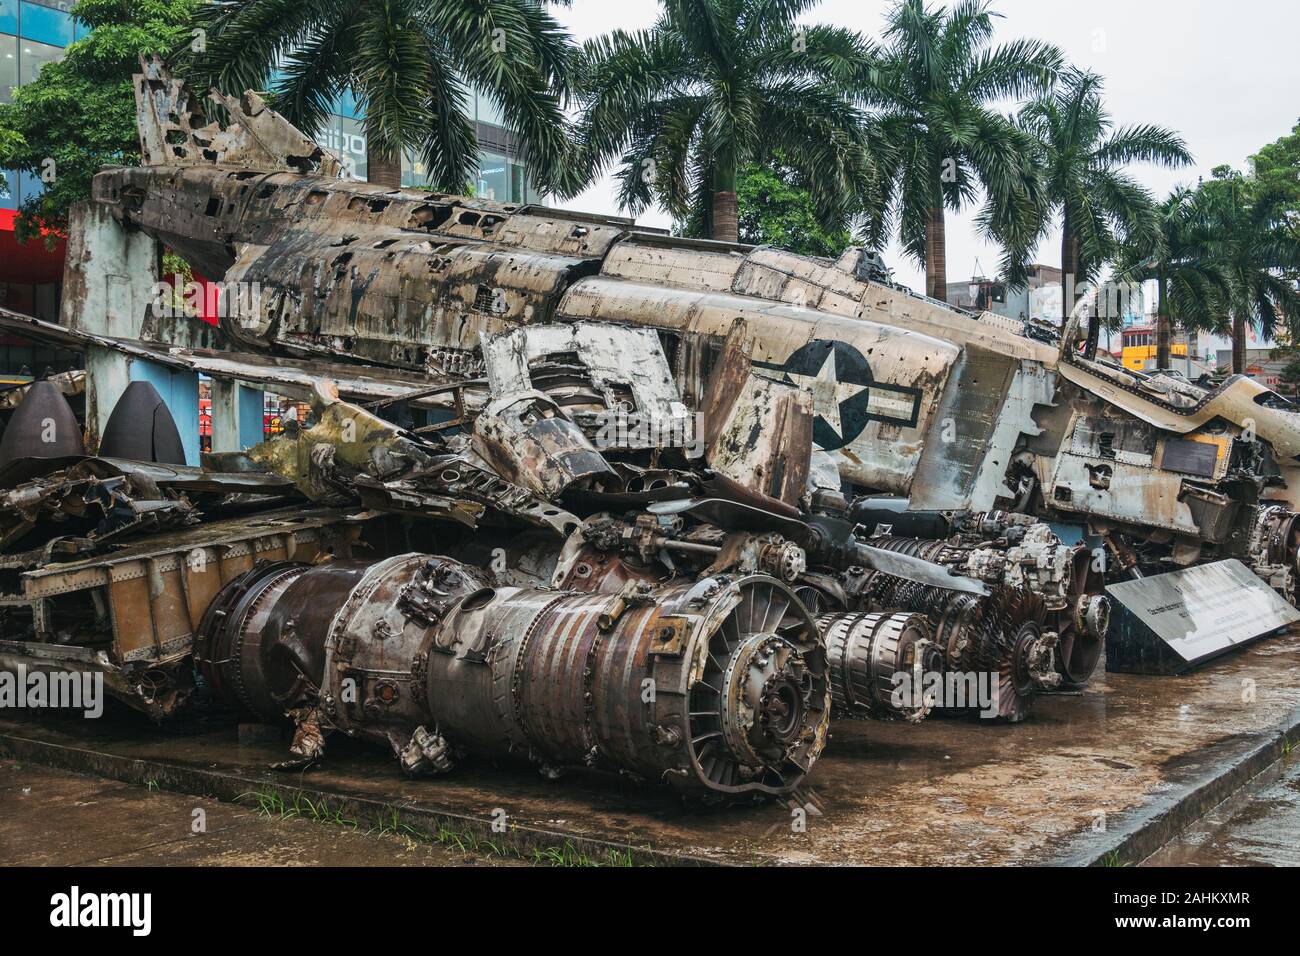 Wreckage of a McDonnell Douglas F-4 Phantom II B fighter-bomber that was shot down during the Vietnam War, on display at the Hanoi Air Museum Stock Photo